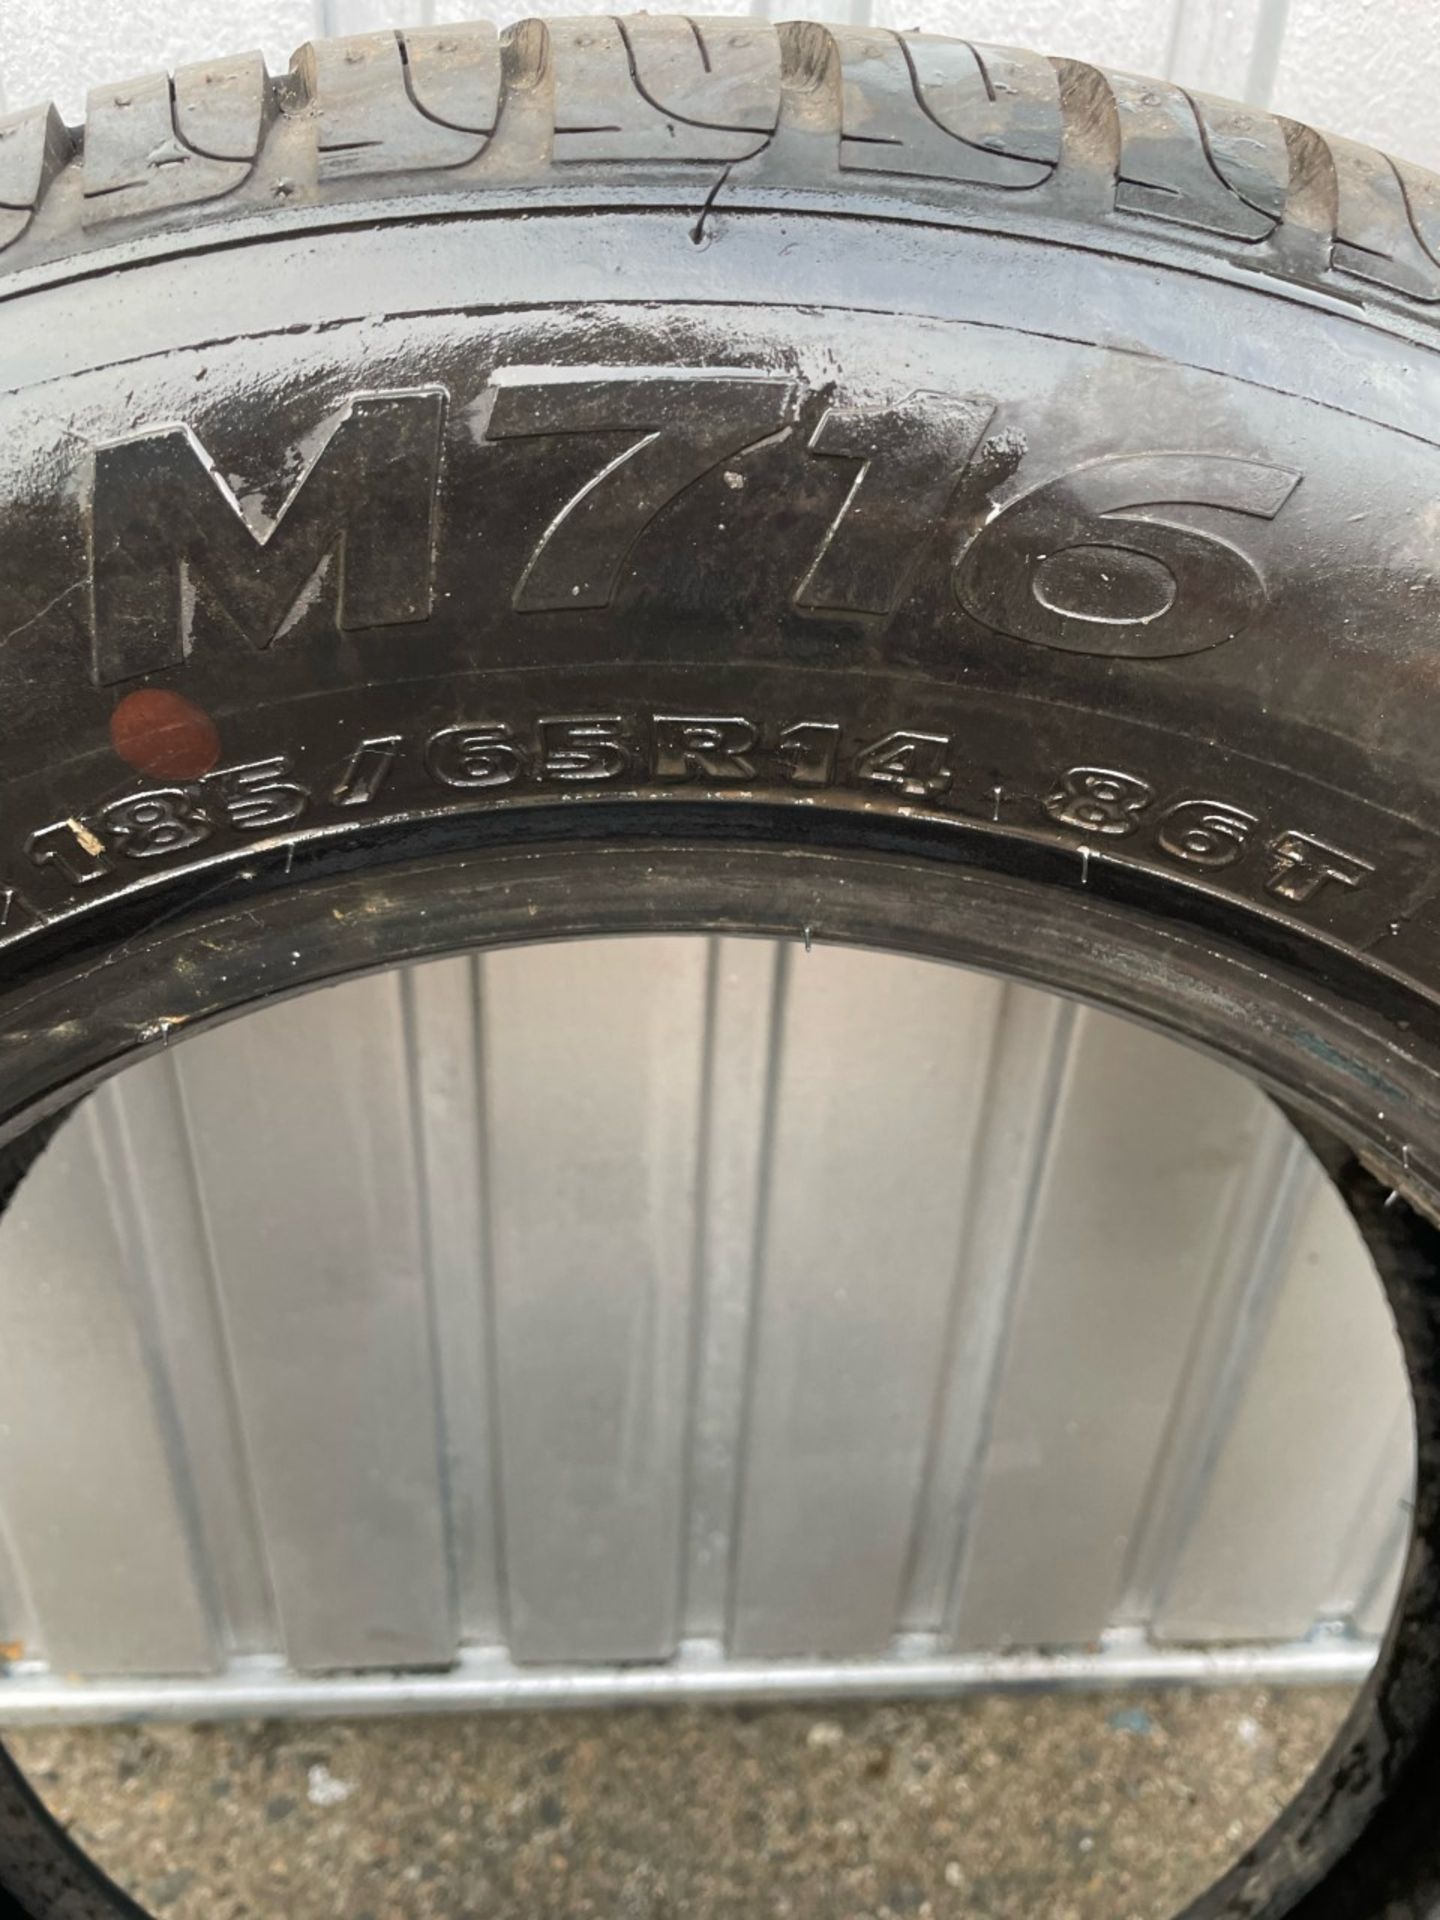 Mohawk M716 185/65 R14 86T, new - Image 2 of 3